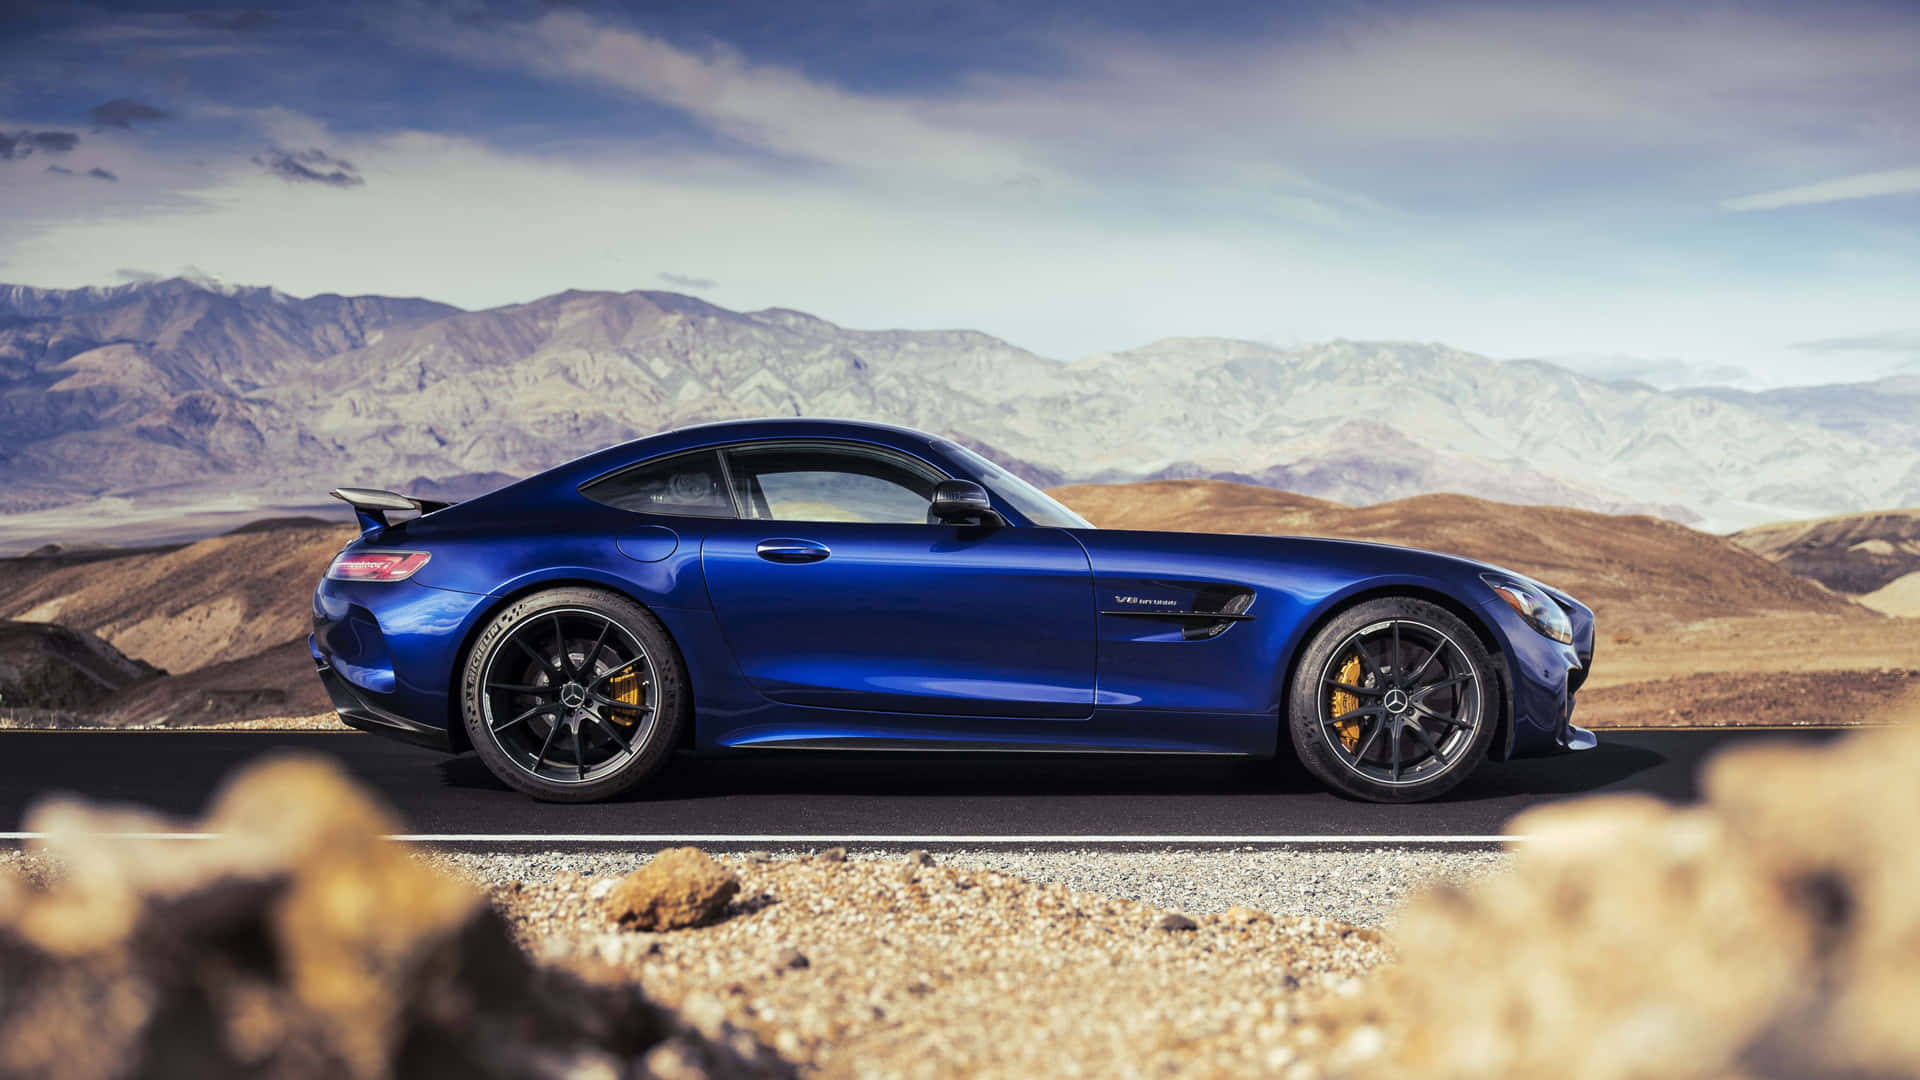 Unlock the power of the future with the Mercedes - AMG GT. Wallpaper